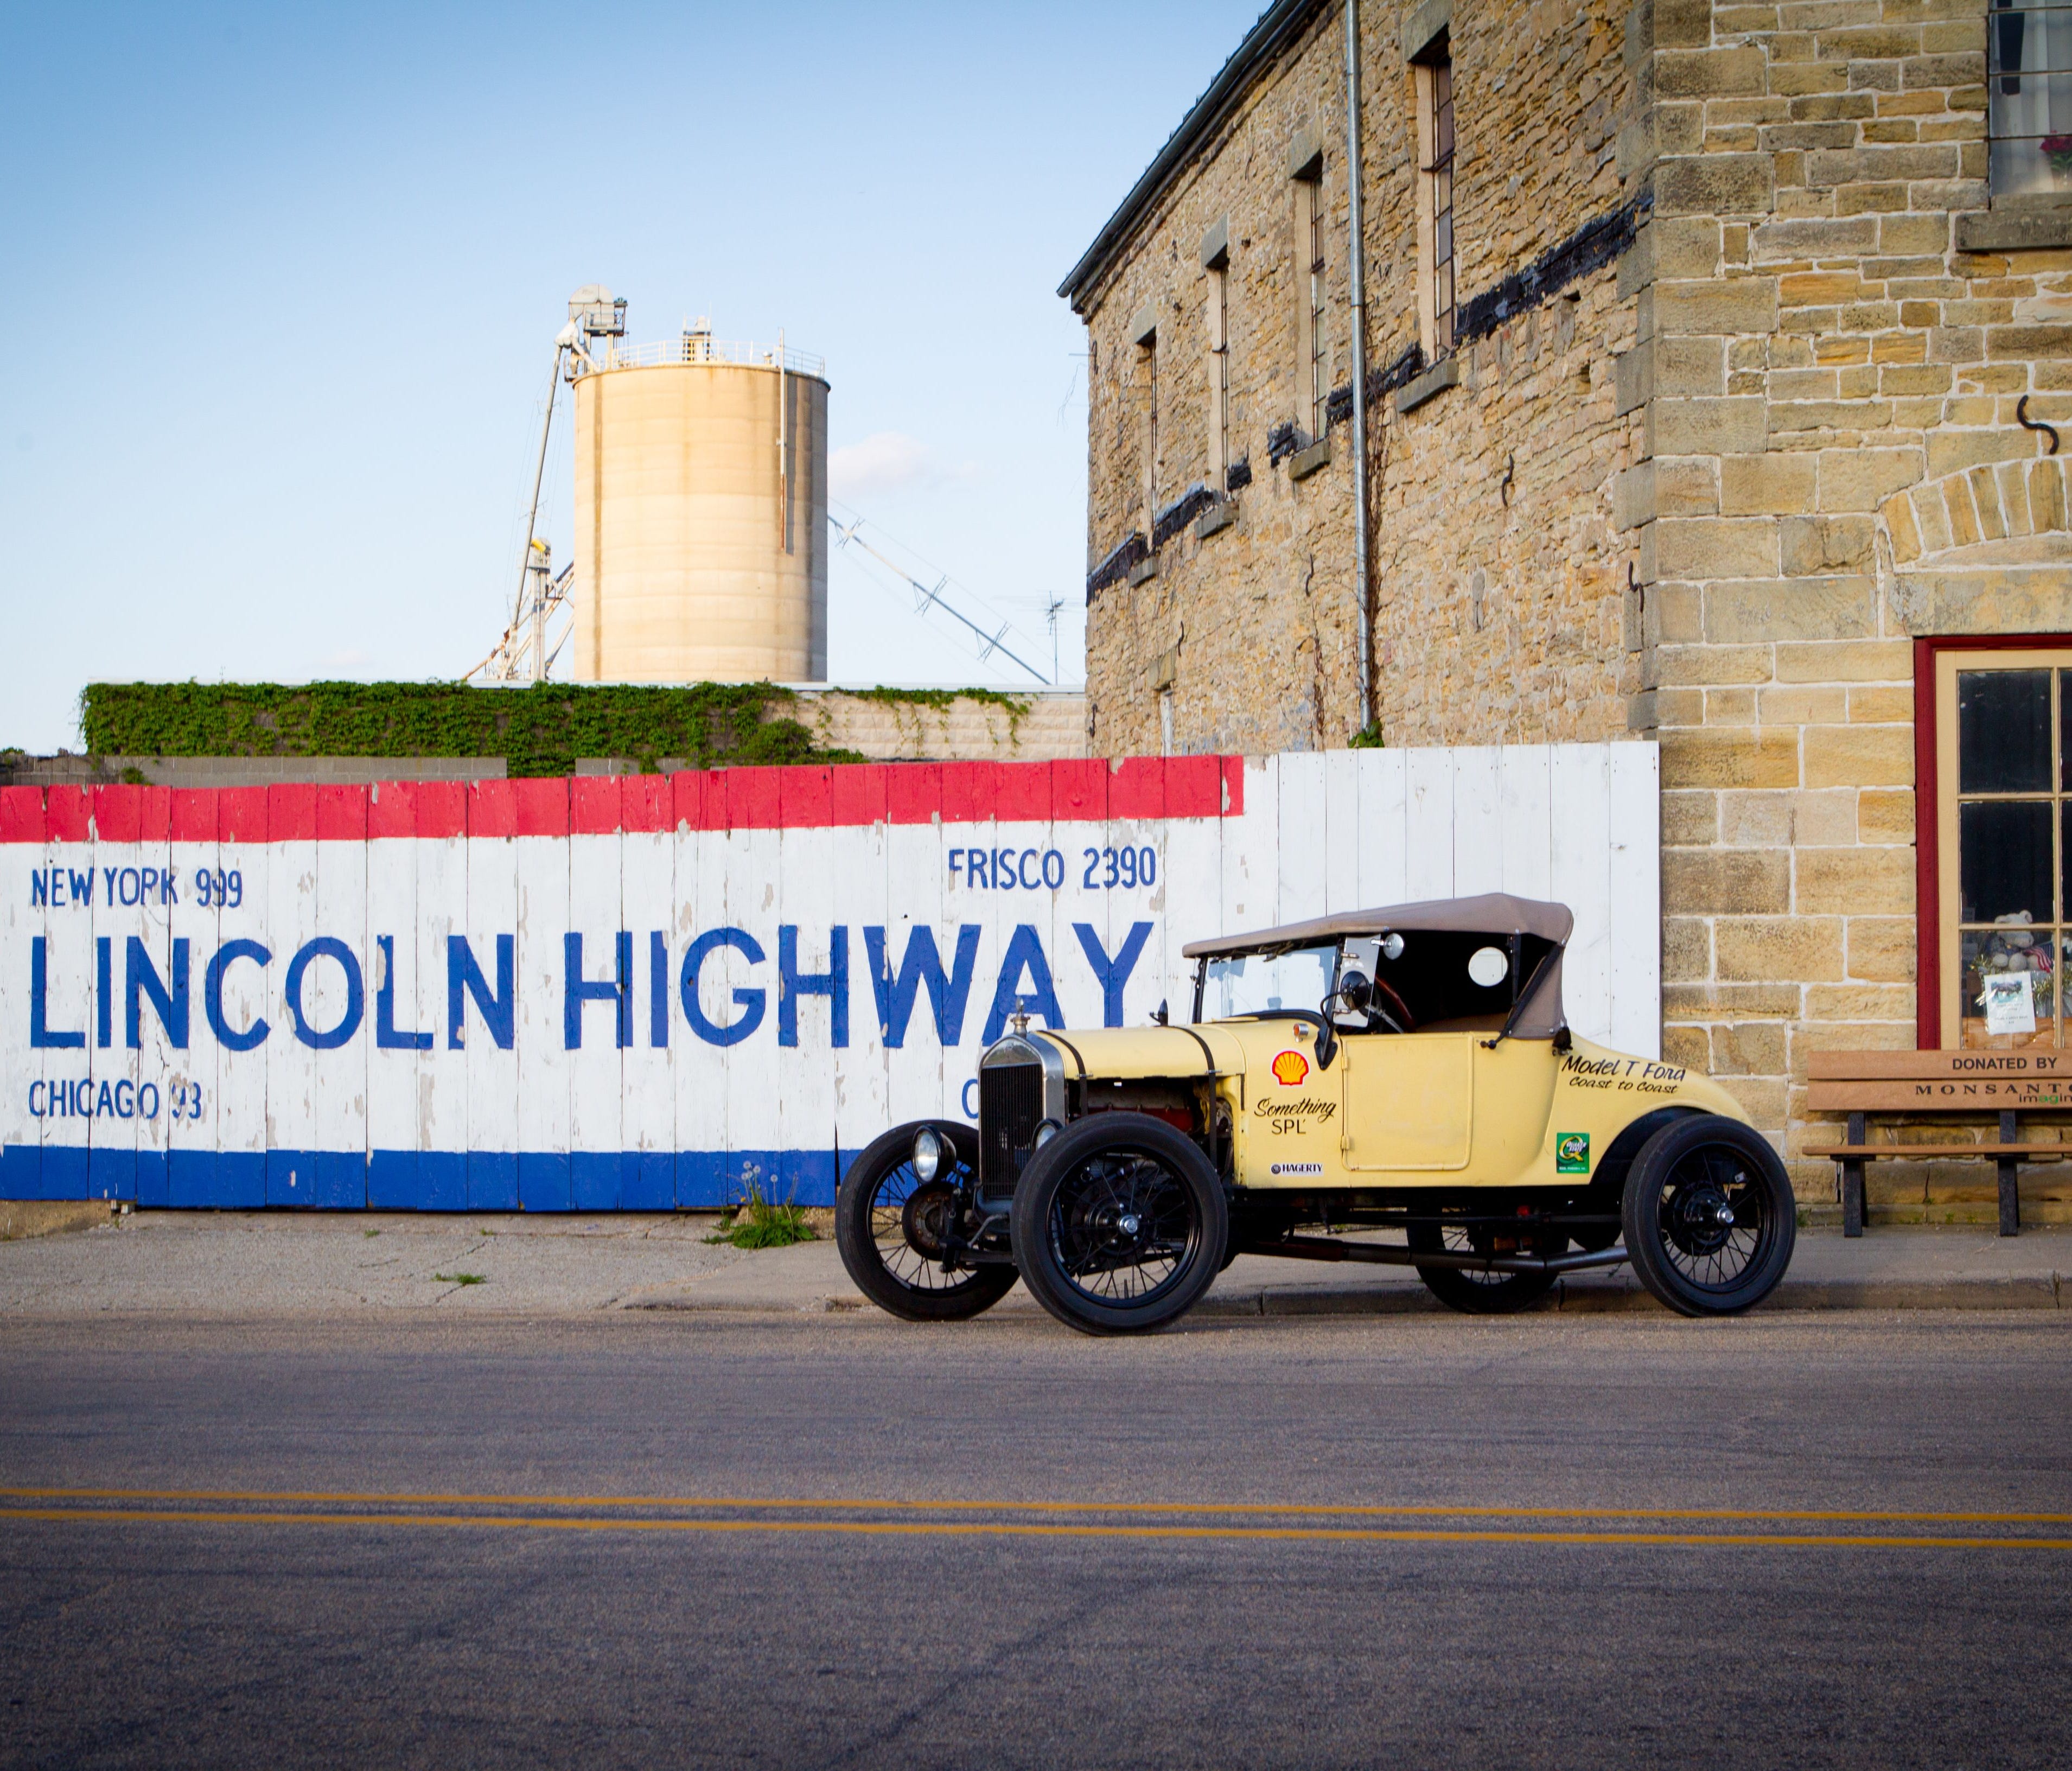 Last spring, author Tom Cotter and photographer Michael Alan Ross set out to recreate the early thrills of the road by driving across the USA in a 1926 Ford Model T.